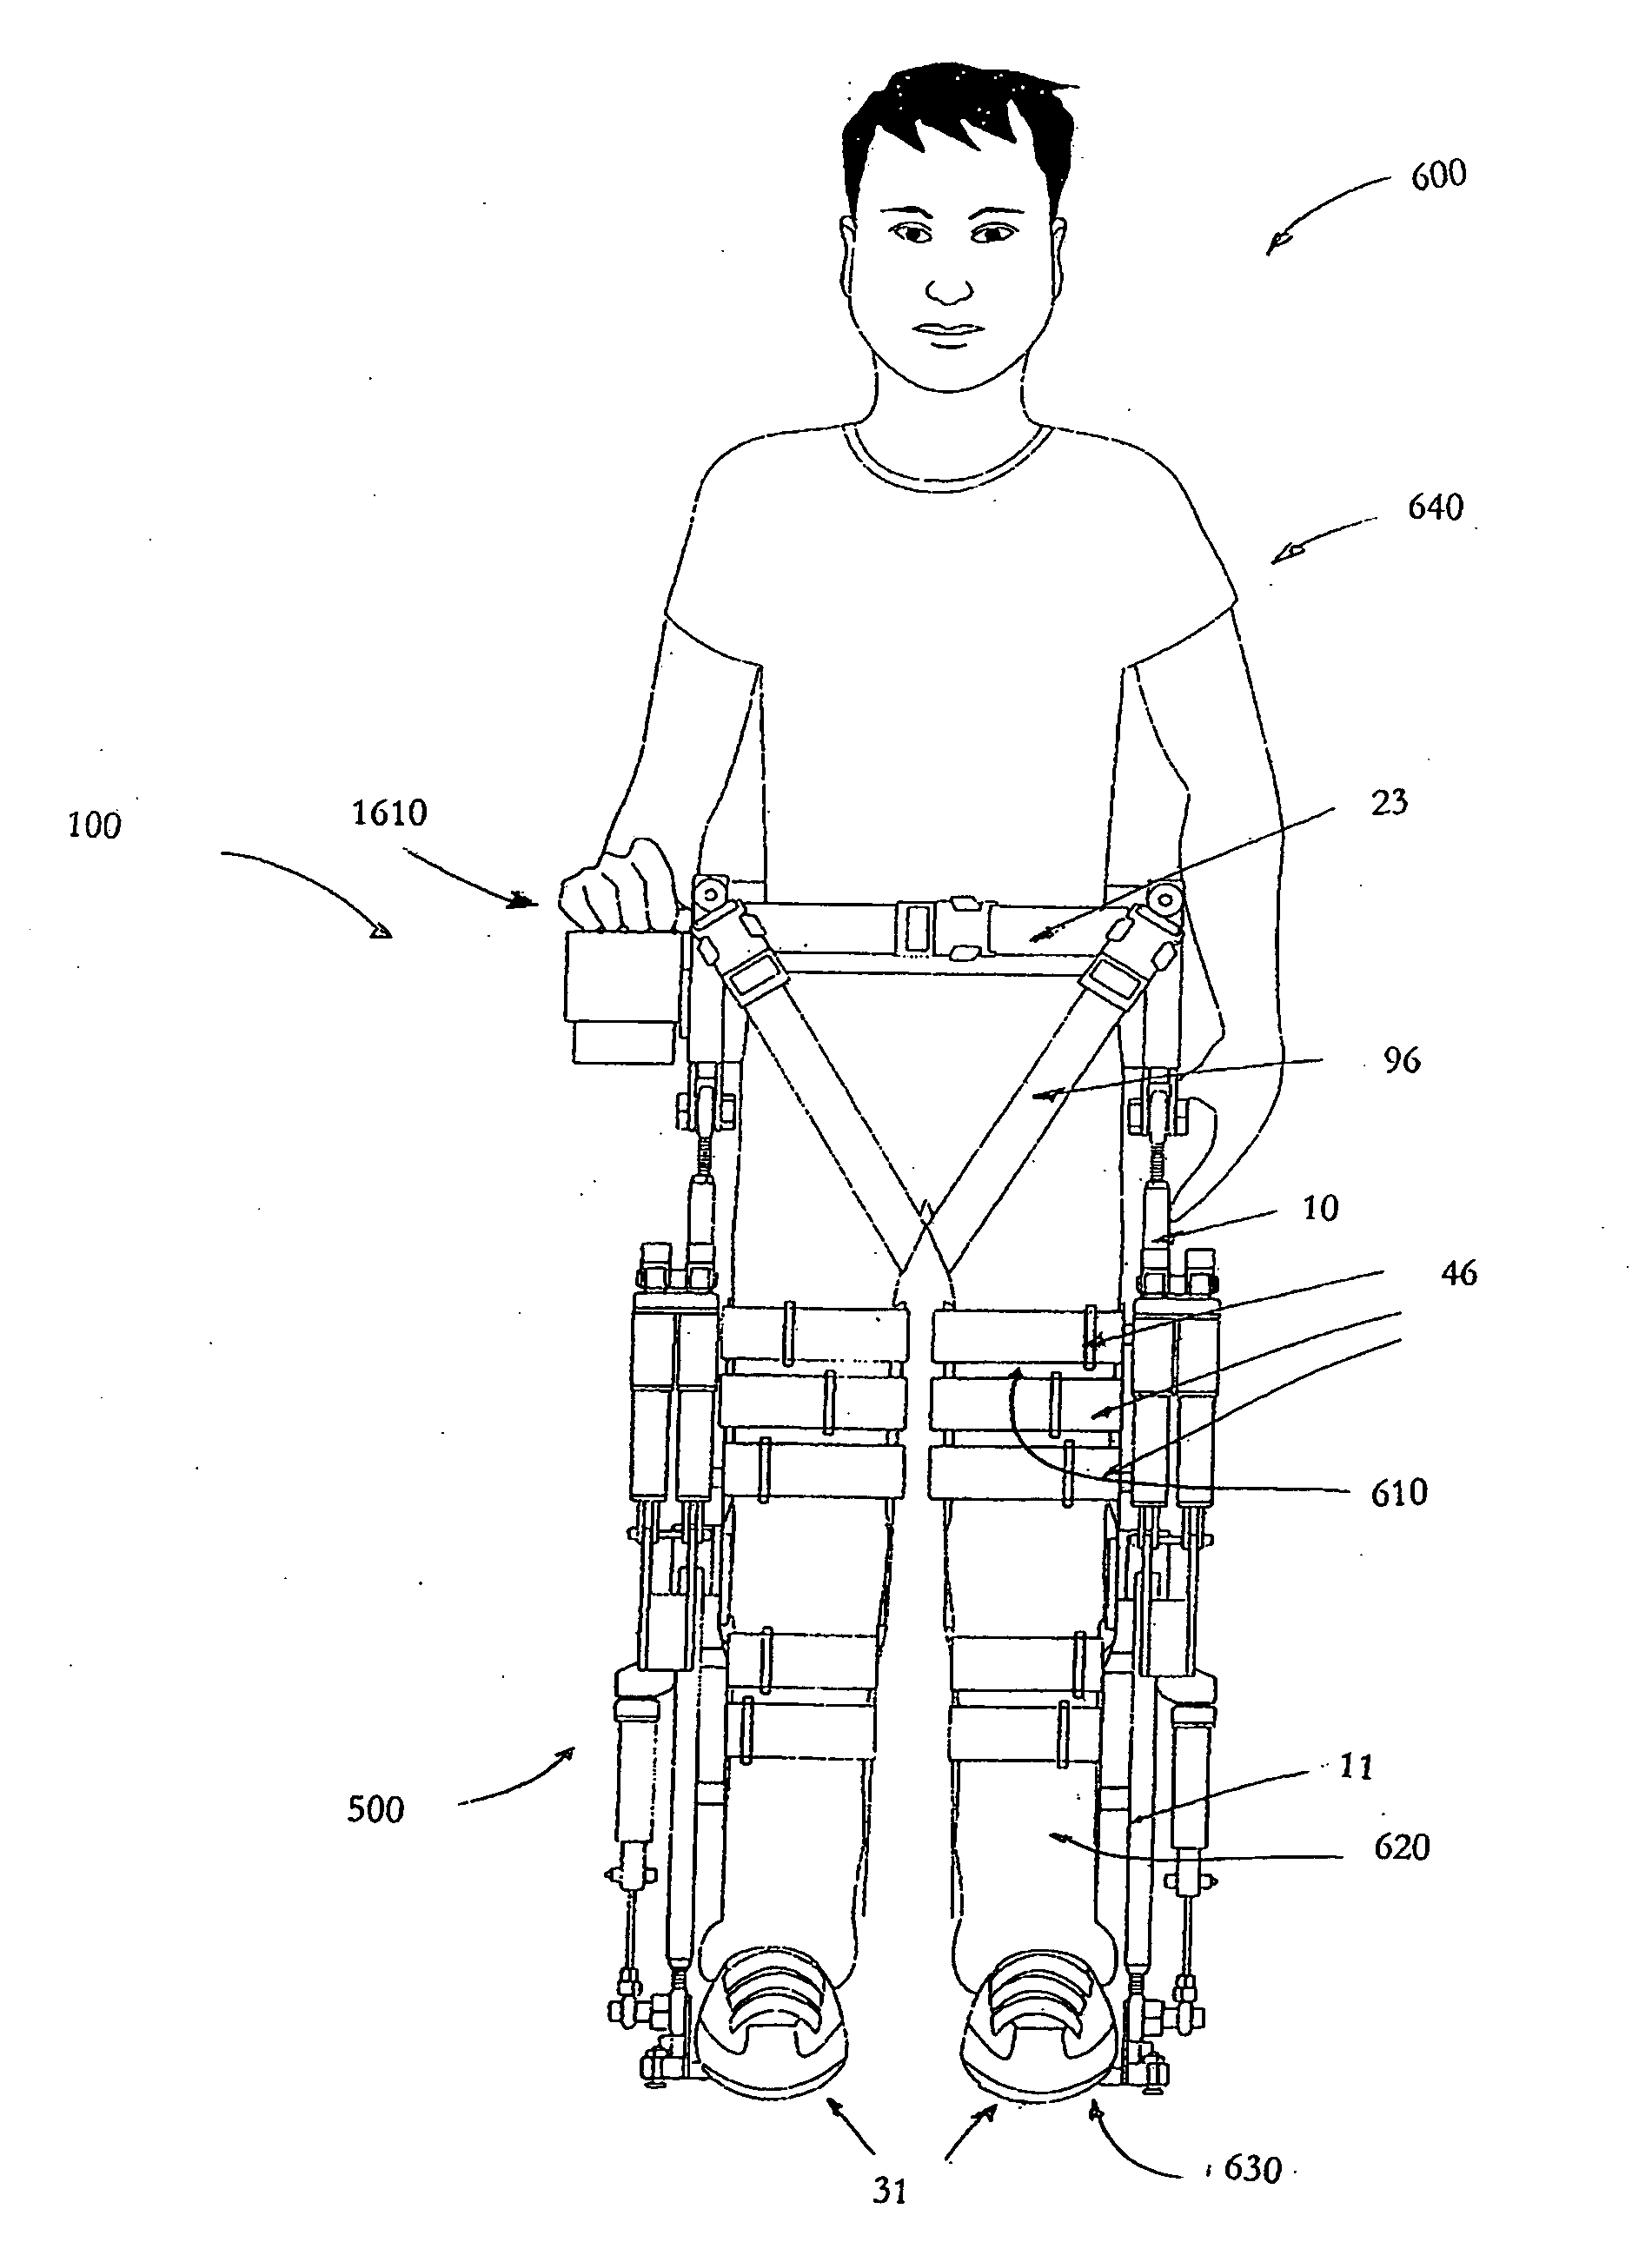 Self contained powered exoskeleton walker for a disabled user